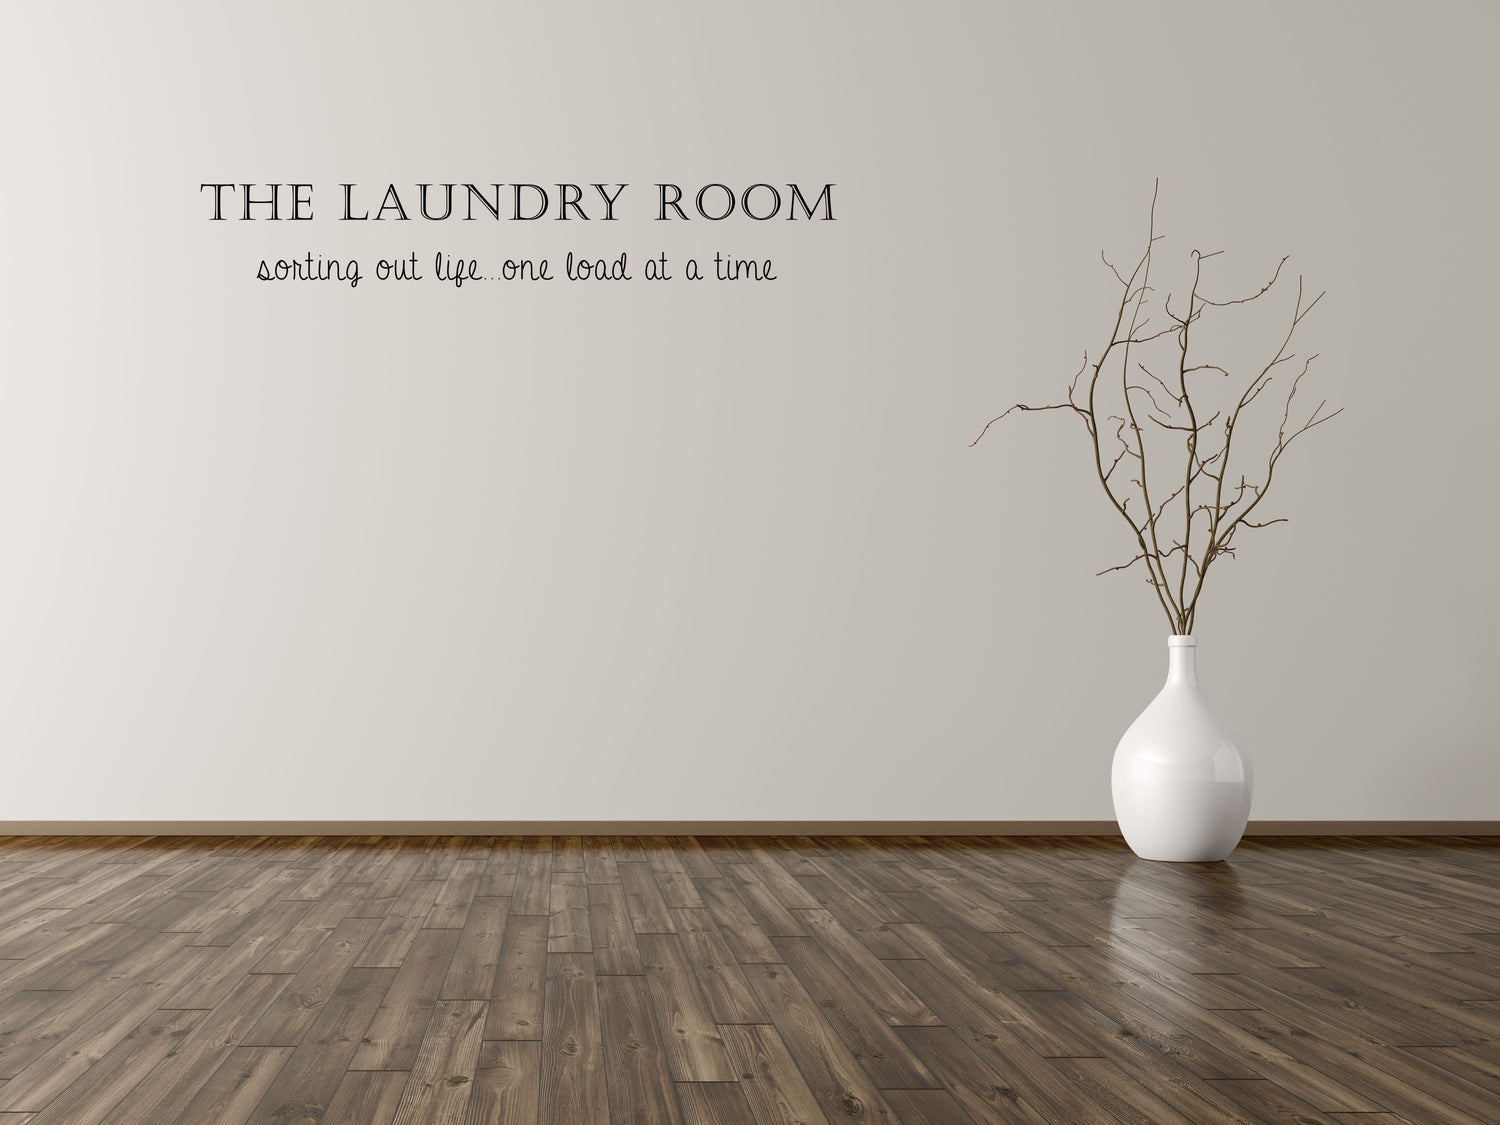 The Laundry Room - Inspirational Wall Signs Vinyl Wall Decal Inspirational Wall Signs 